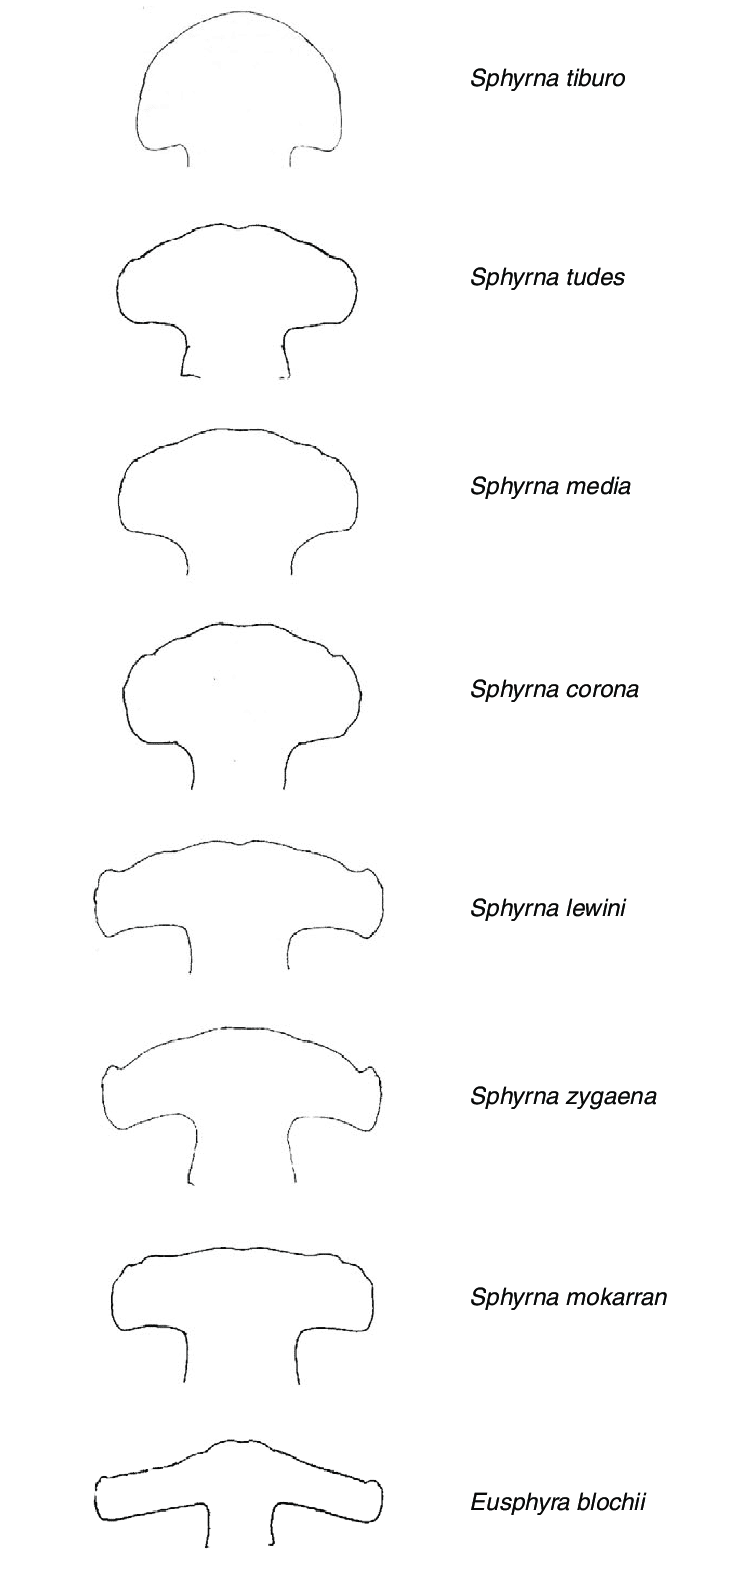 Head morphology of all great hammered shark species in the Sphyrnidae family (line drawings modified from Compagno, 1984).